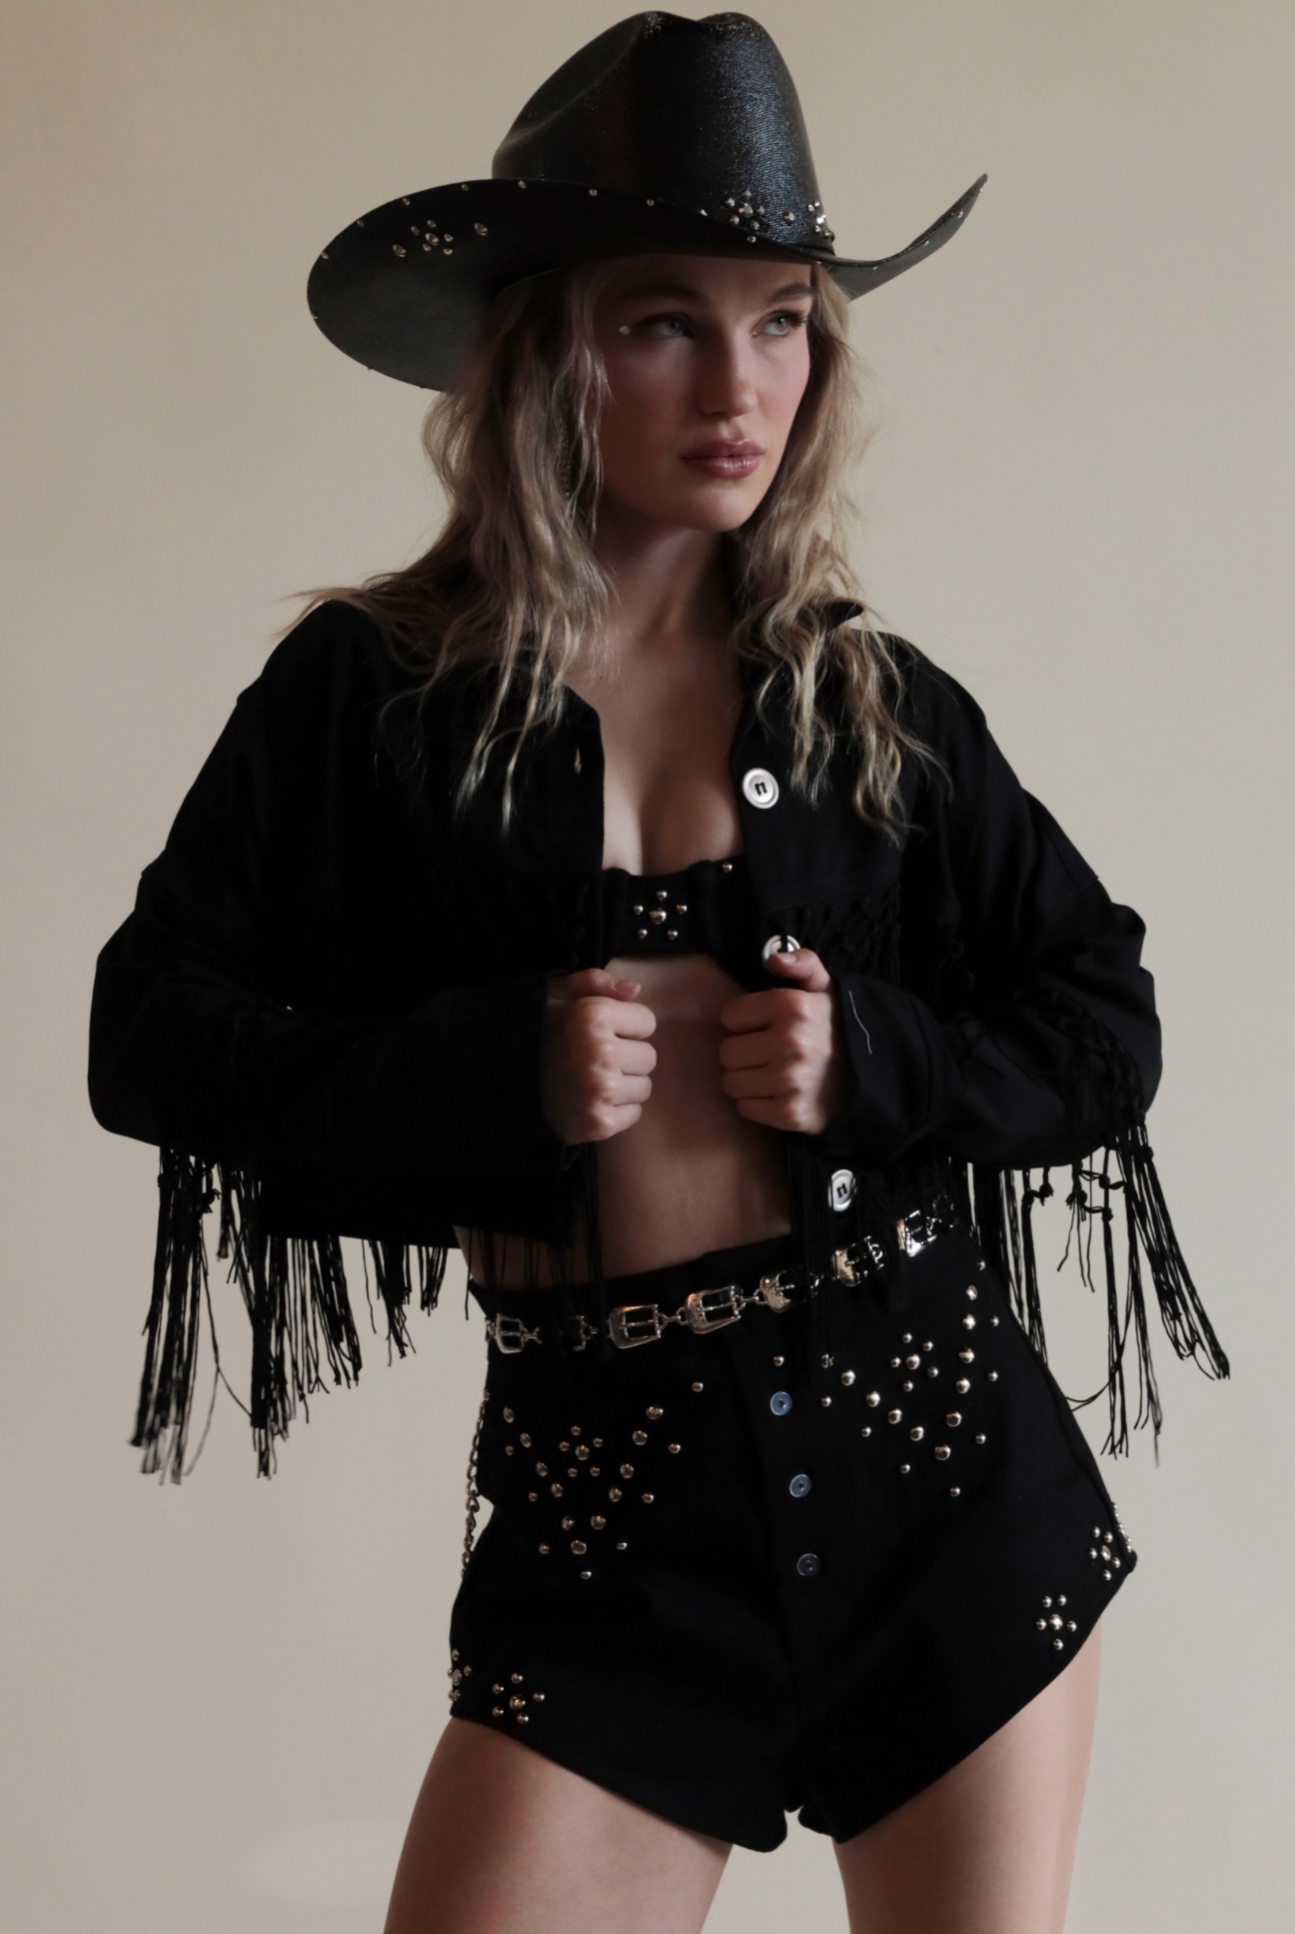 Black cowboy hat with metallic jewels paired with denim grommeted set and fringe jacket.